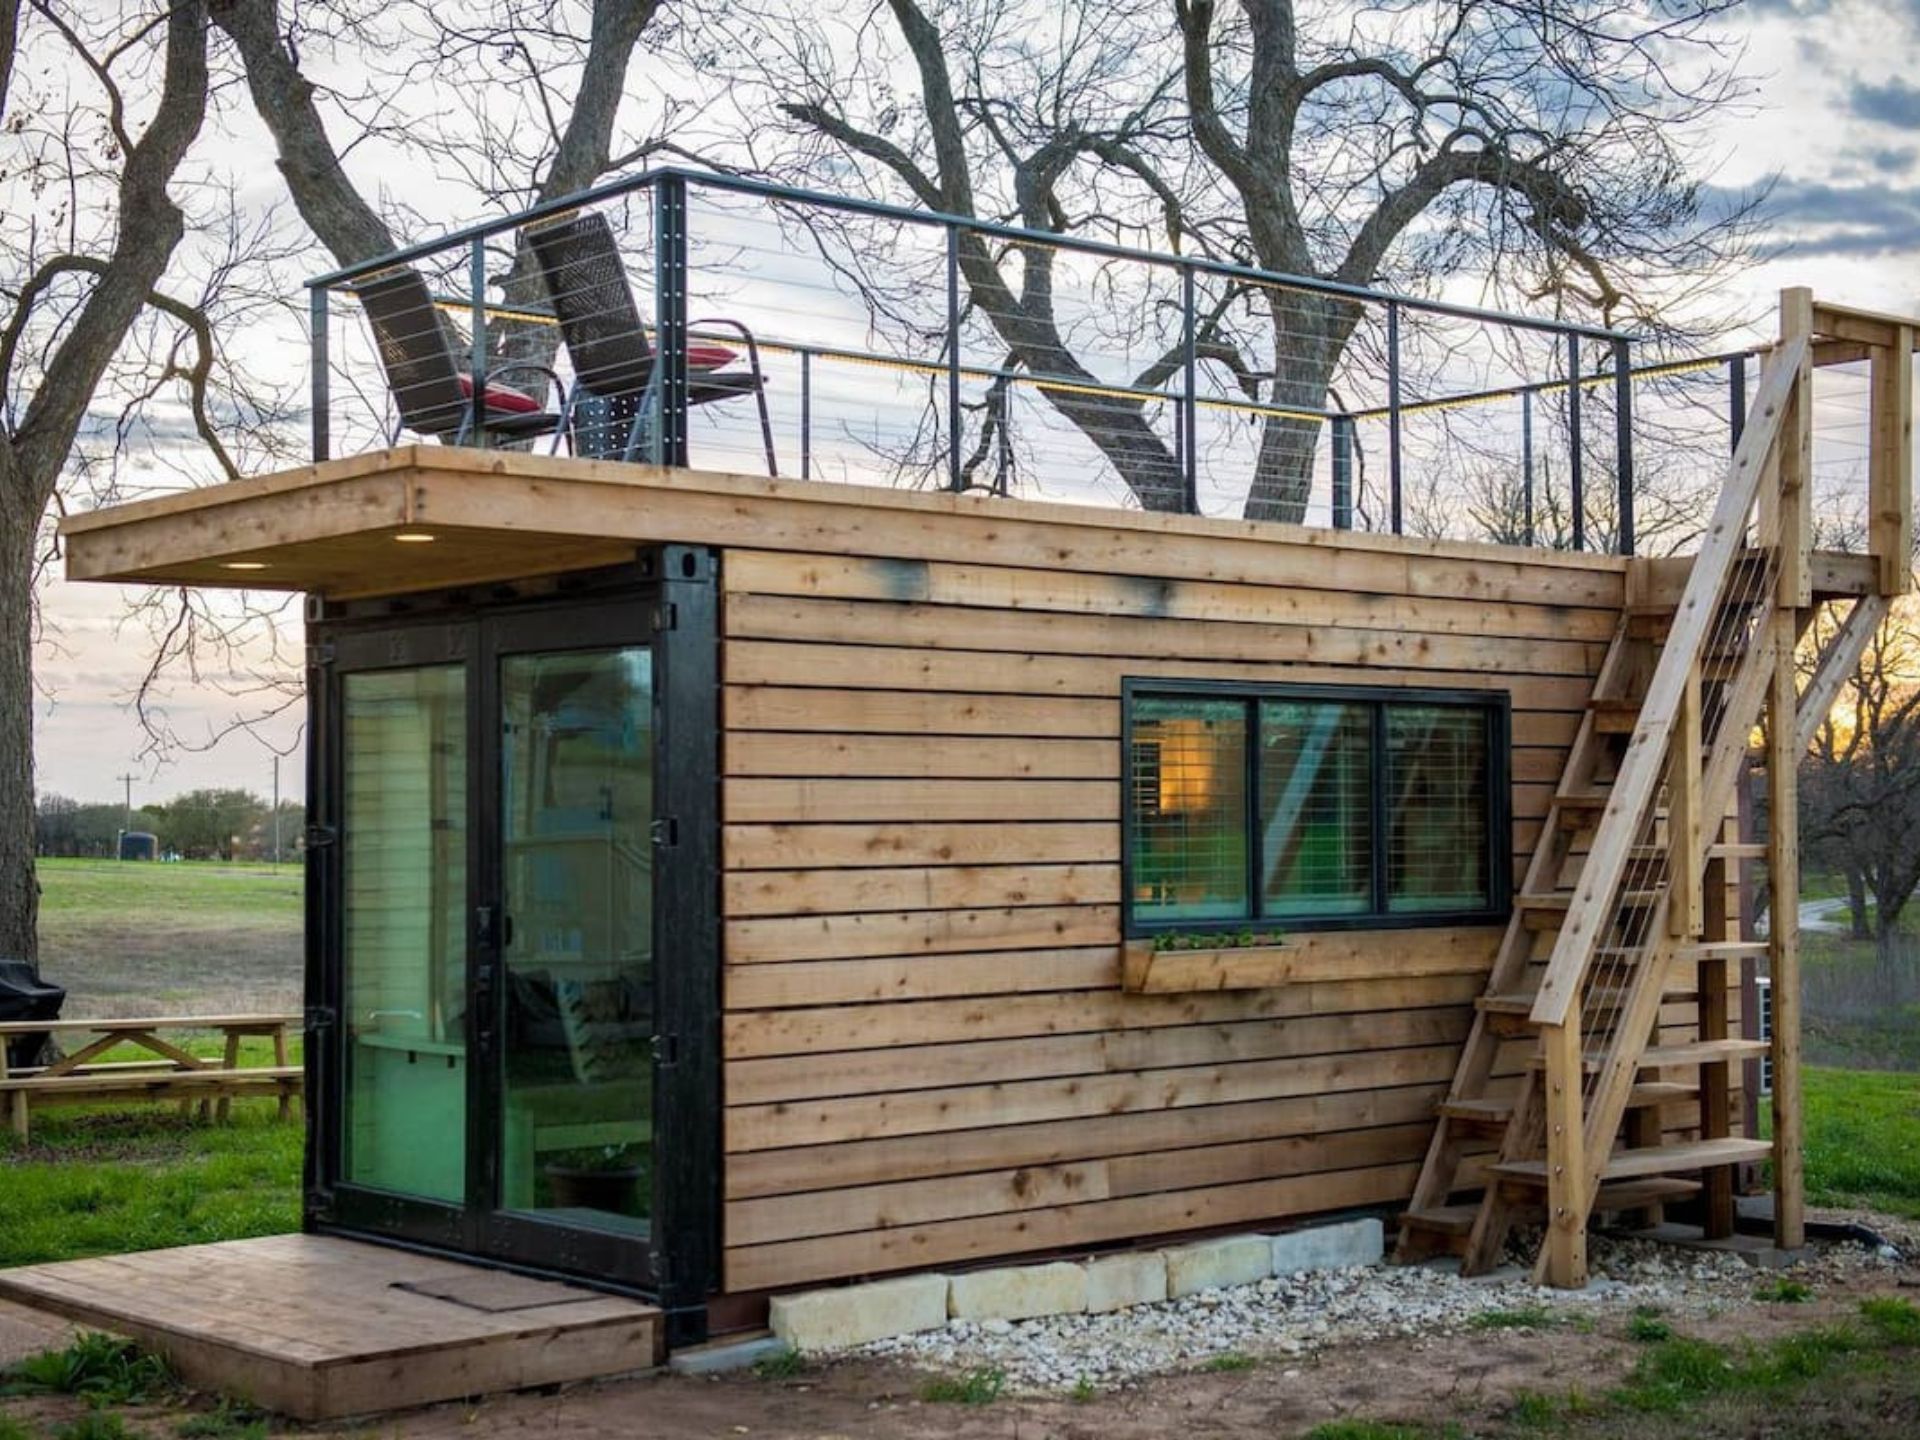 This Beautiful Shipping Container House Is The Biggest Hit Right Now